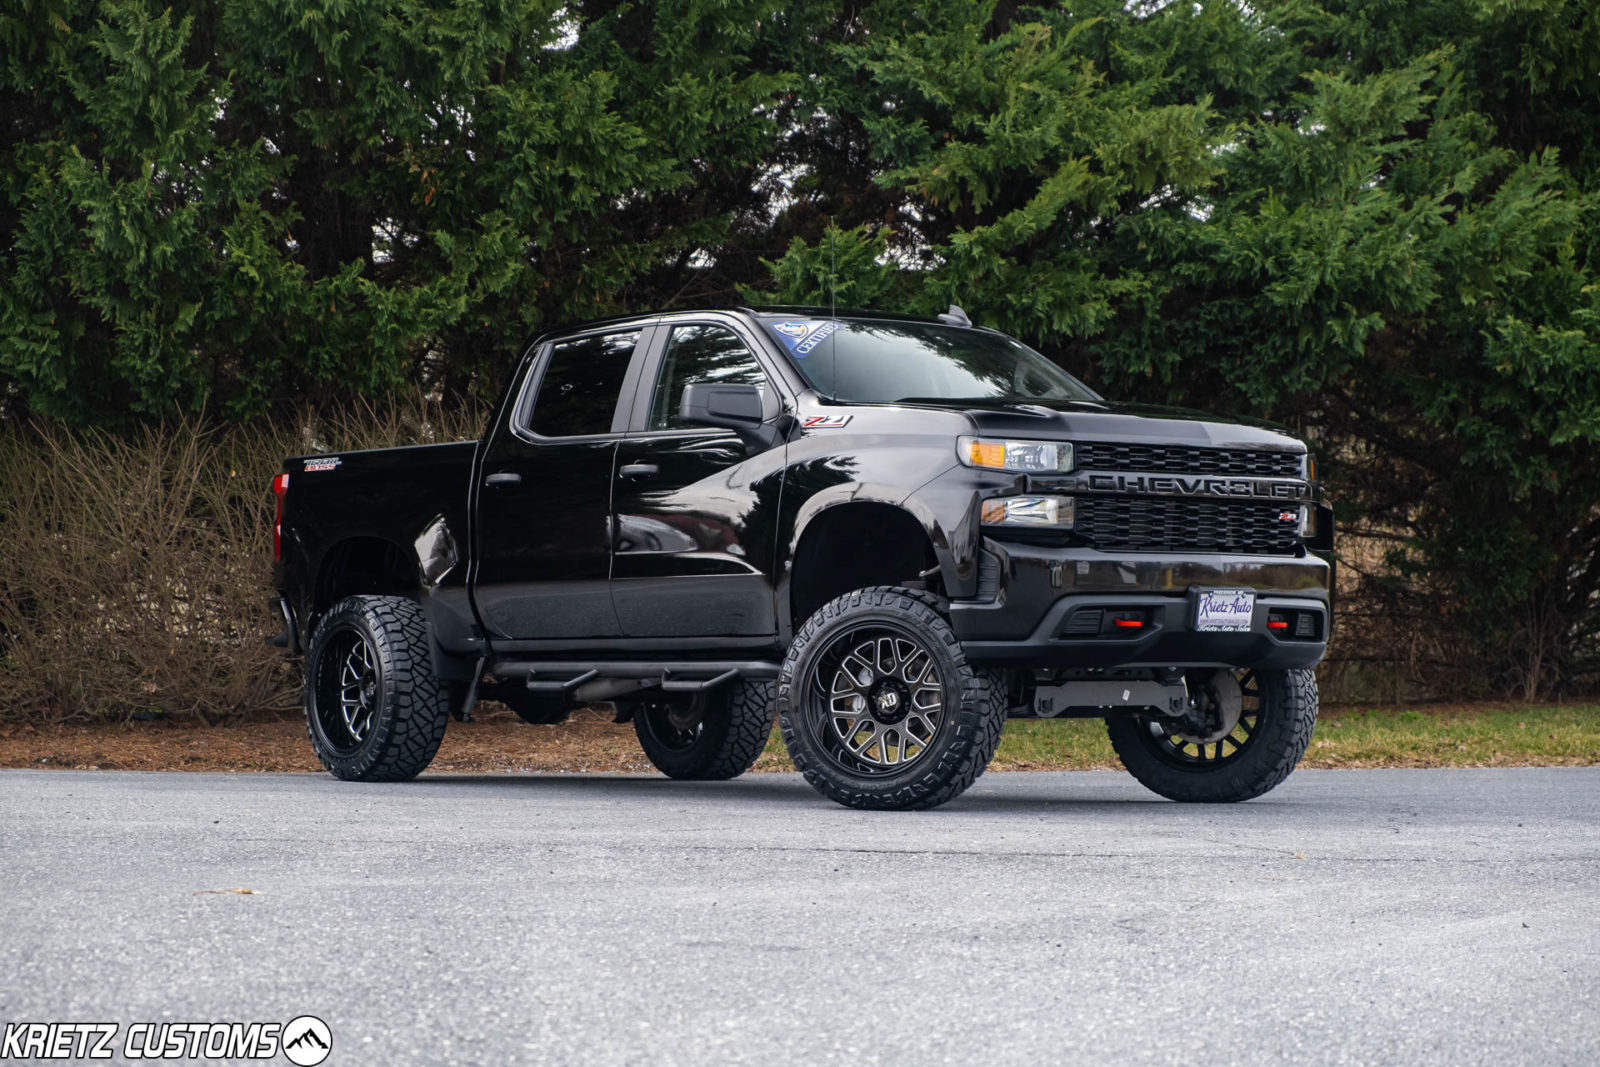 Lifted 2019 Chevy Silverado 1500 with 22×12 XD Grenade XD820 with 6